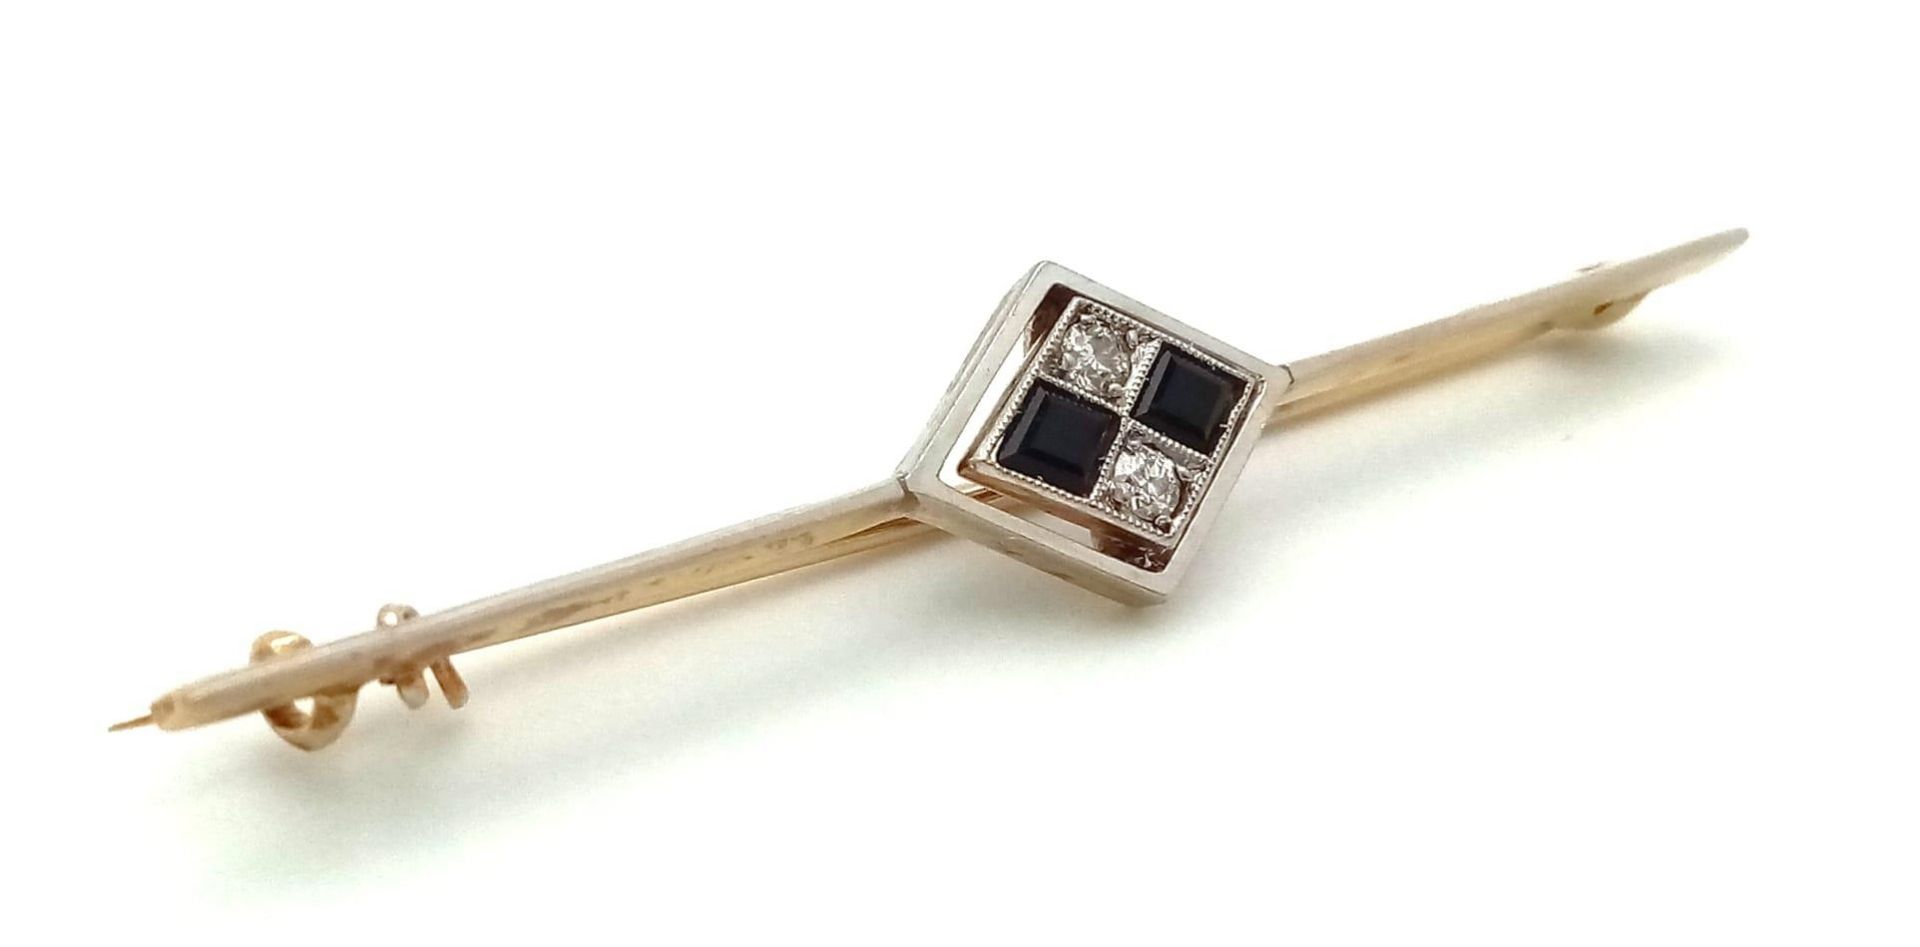 An Art Deco Diamond and Onyx Brooch in 18K Gold and Platinum. 5.5cm. 3.75g total weight.